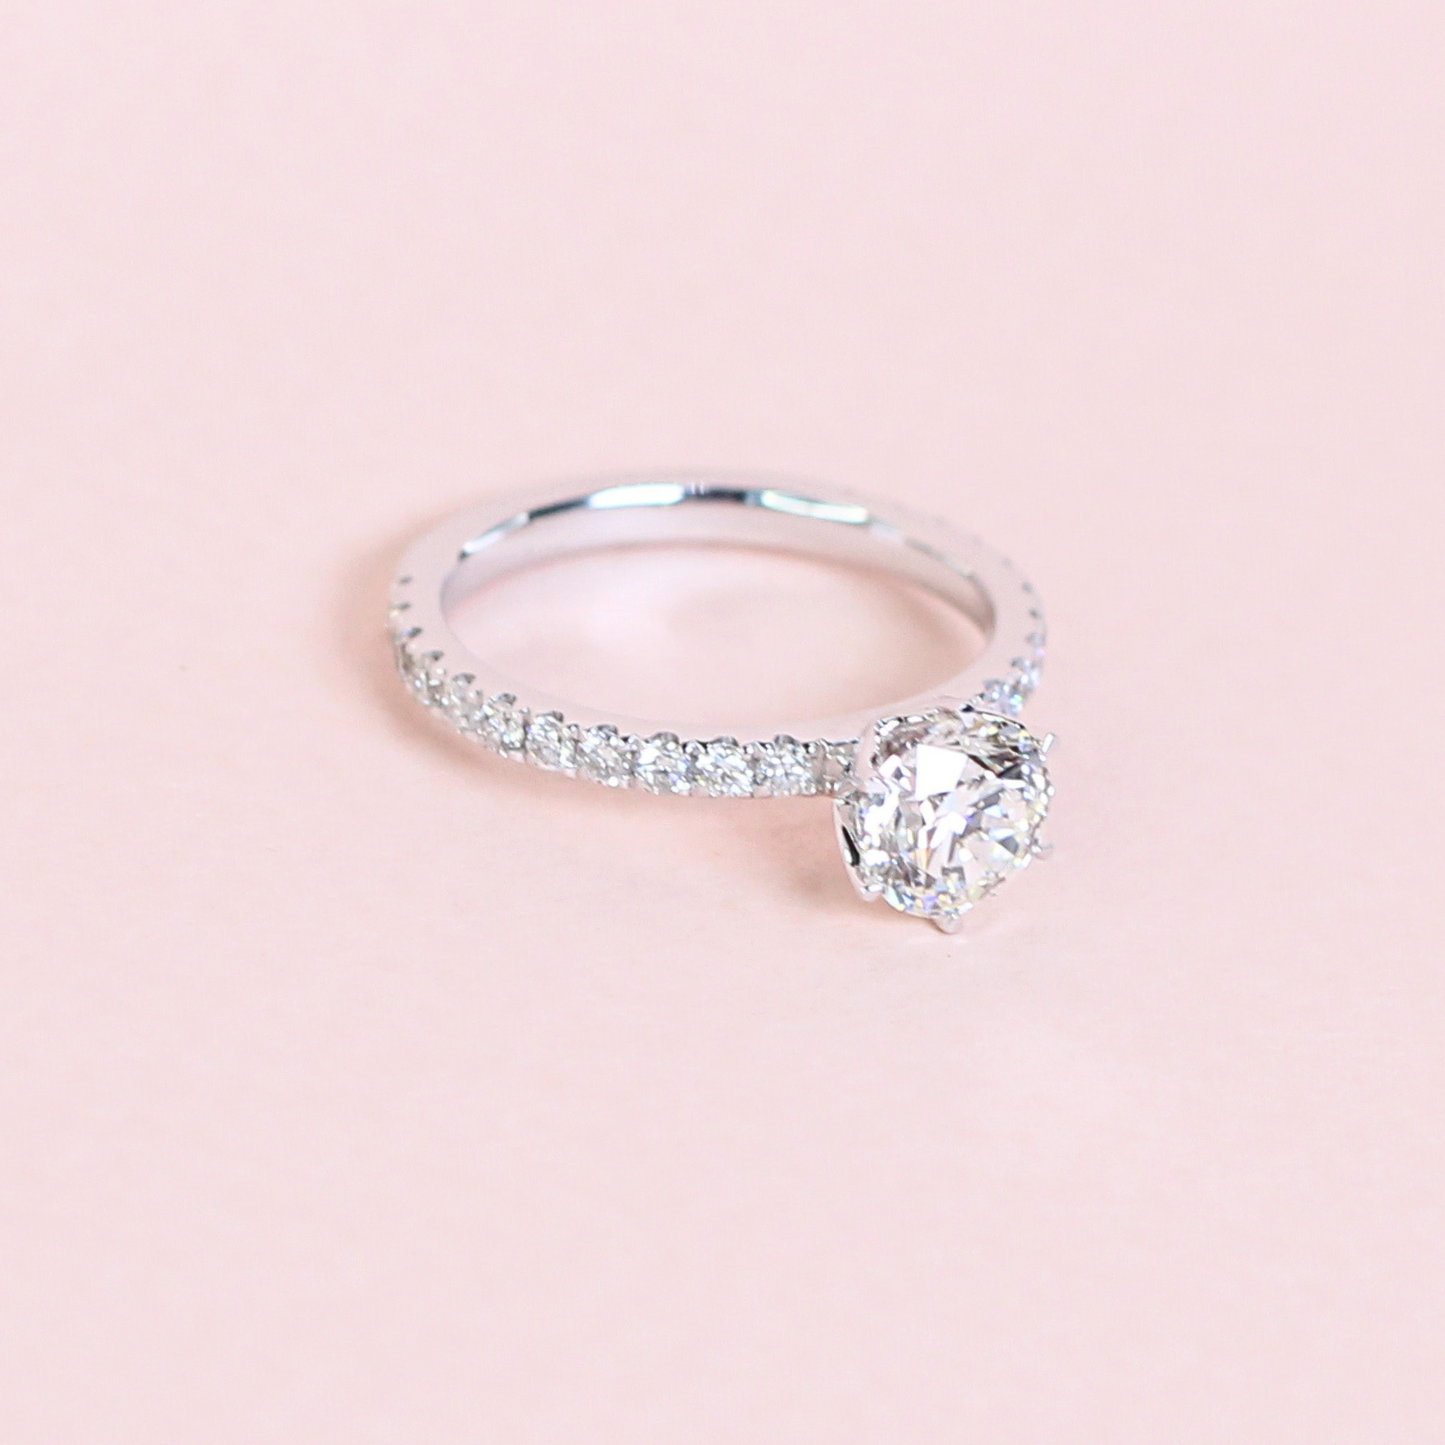 1ct Round Diamond ring in high petal prong pave setting